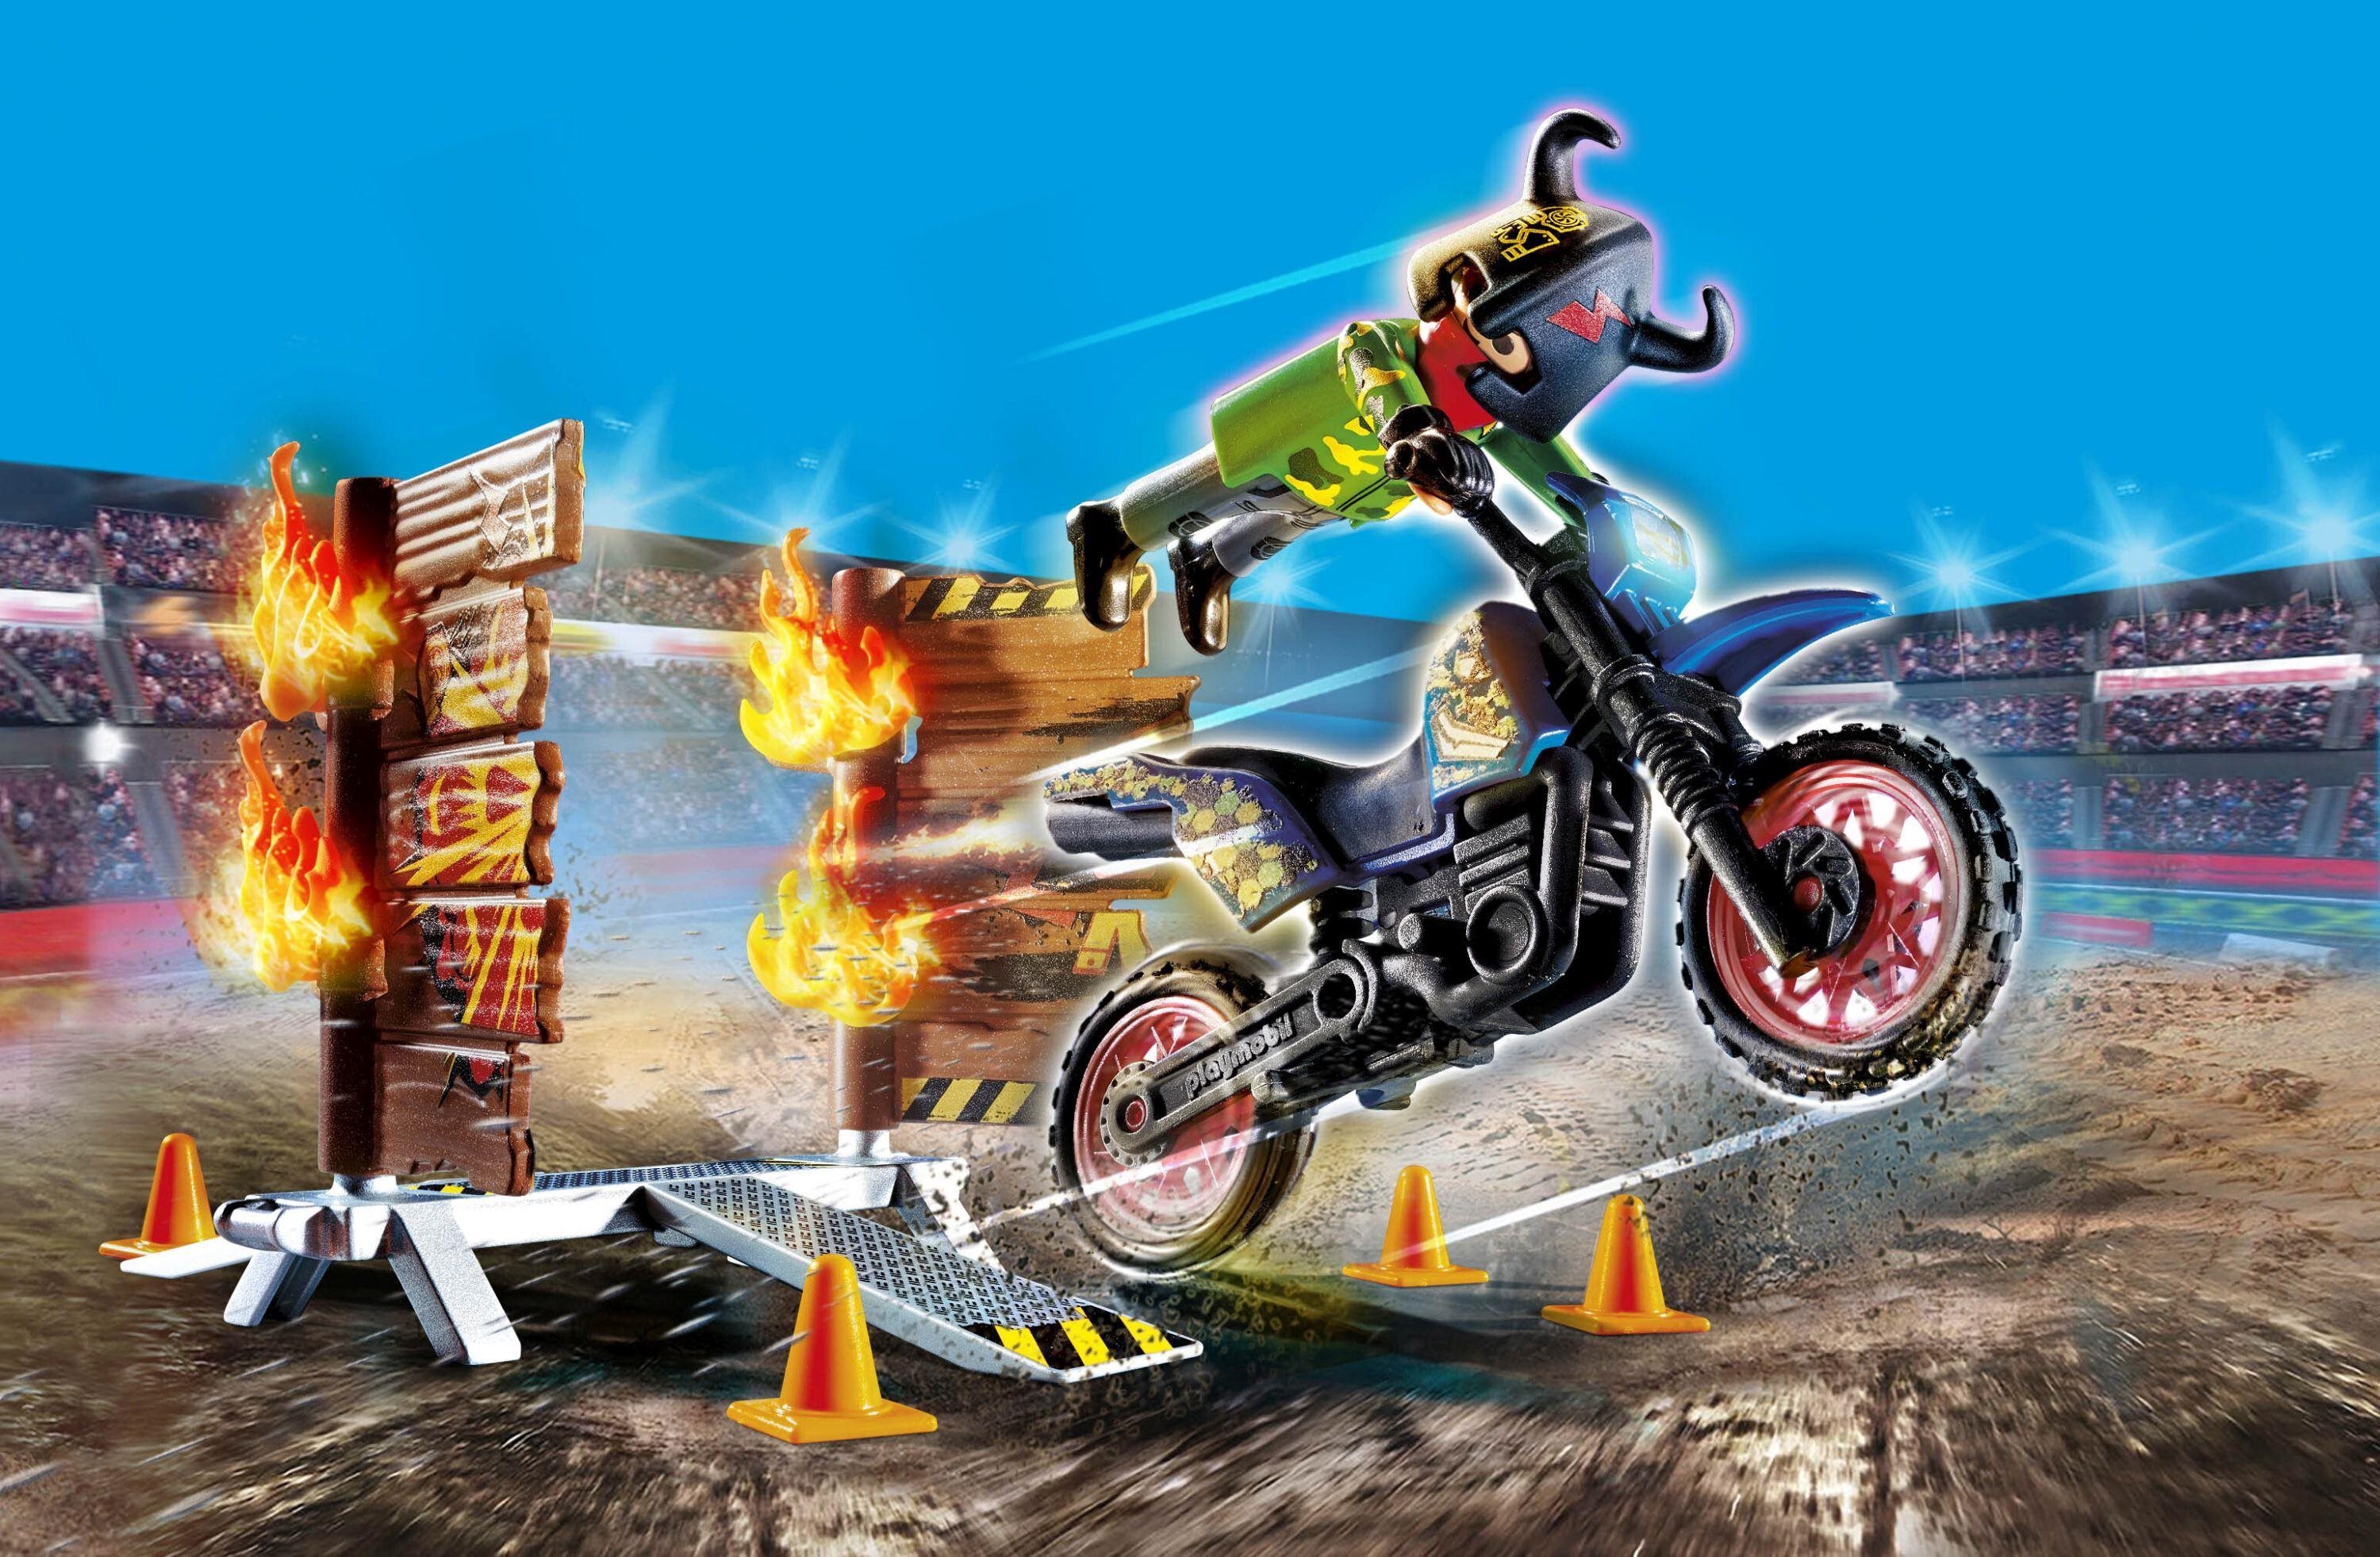 Building Set Playmobil 70553 Stunt Show Motorbike with Fire Wall Lifestyle